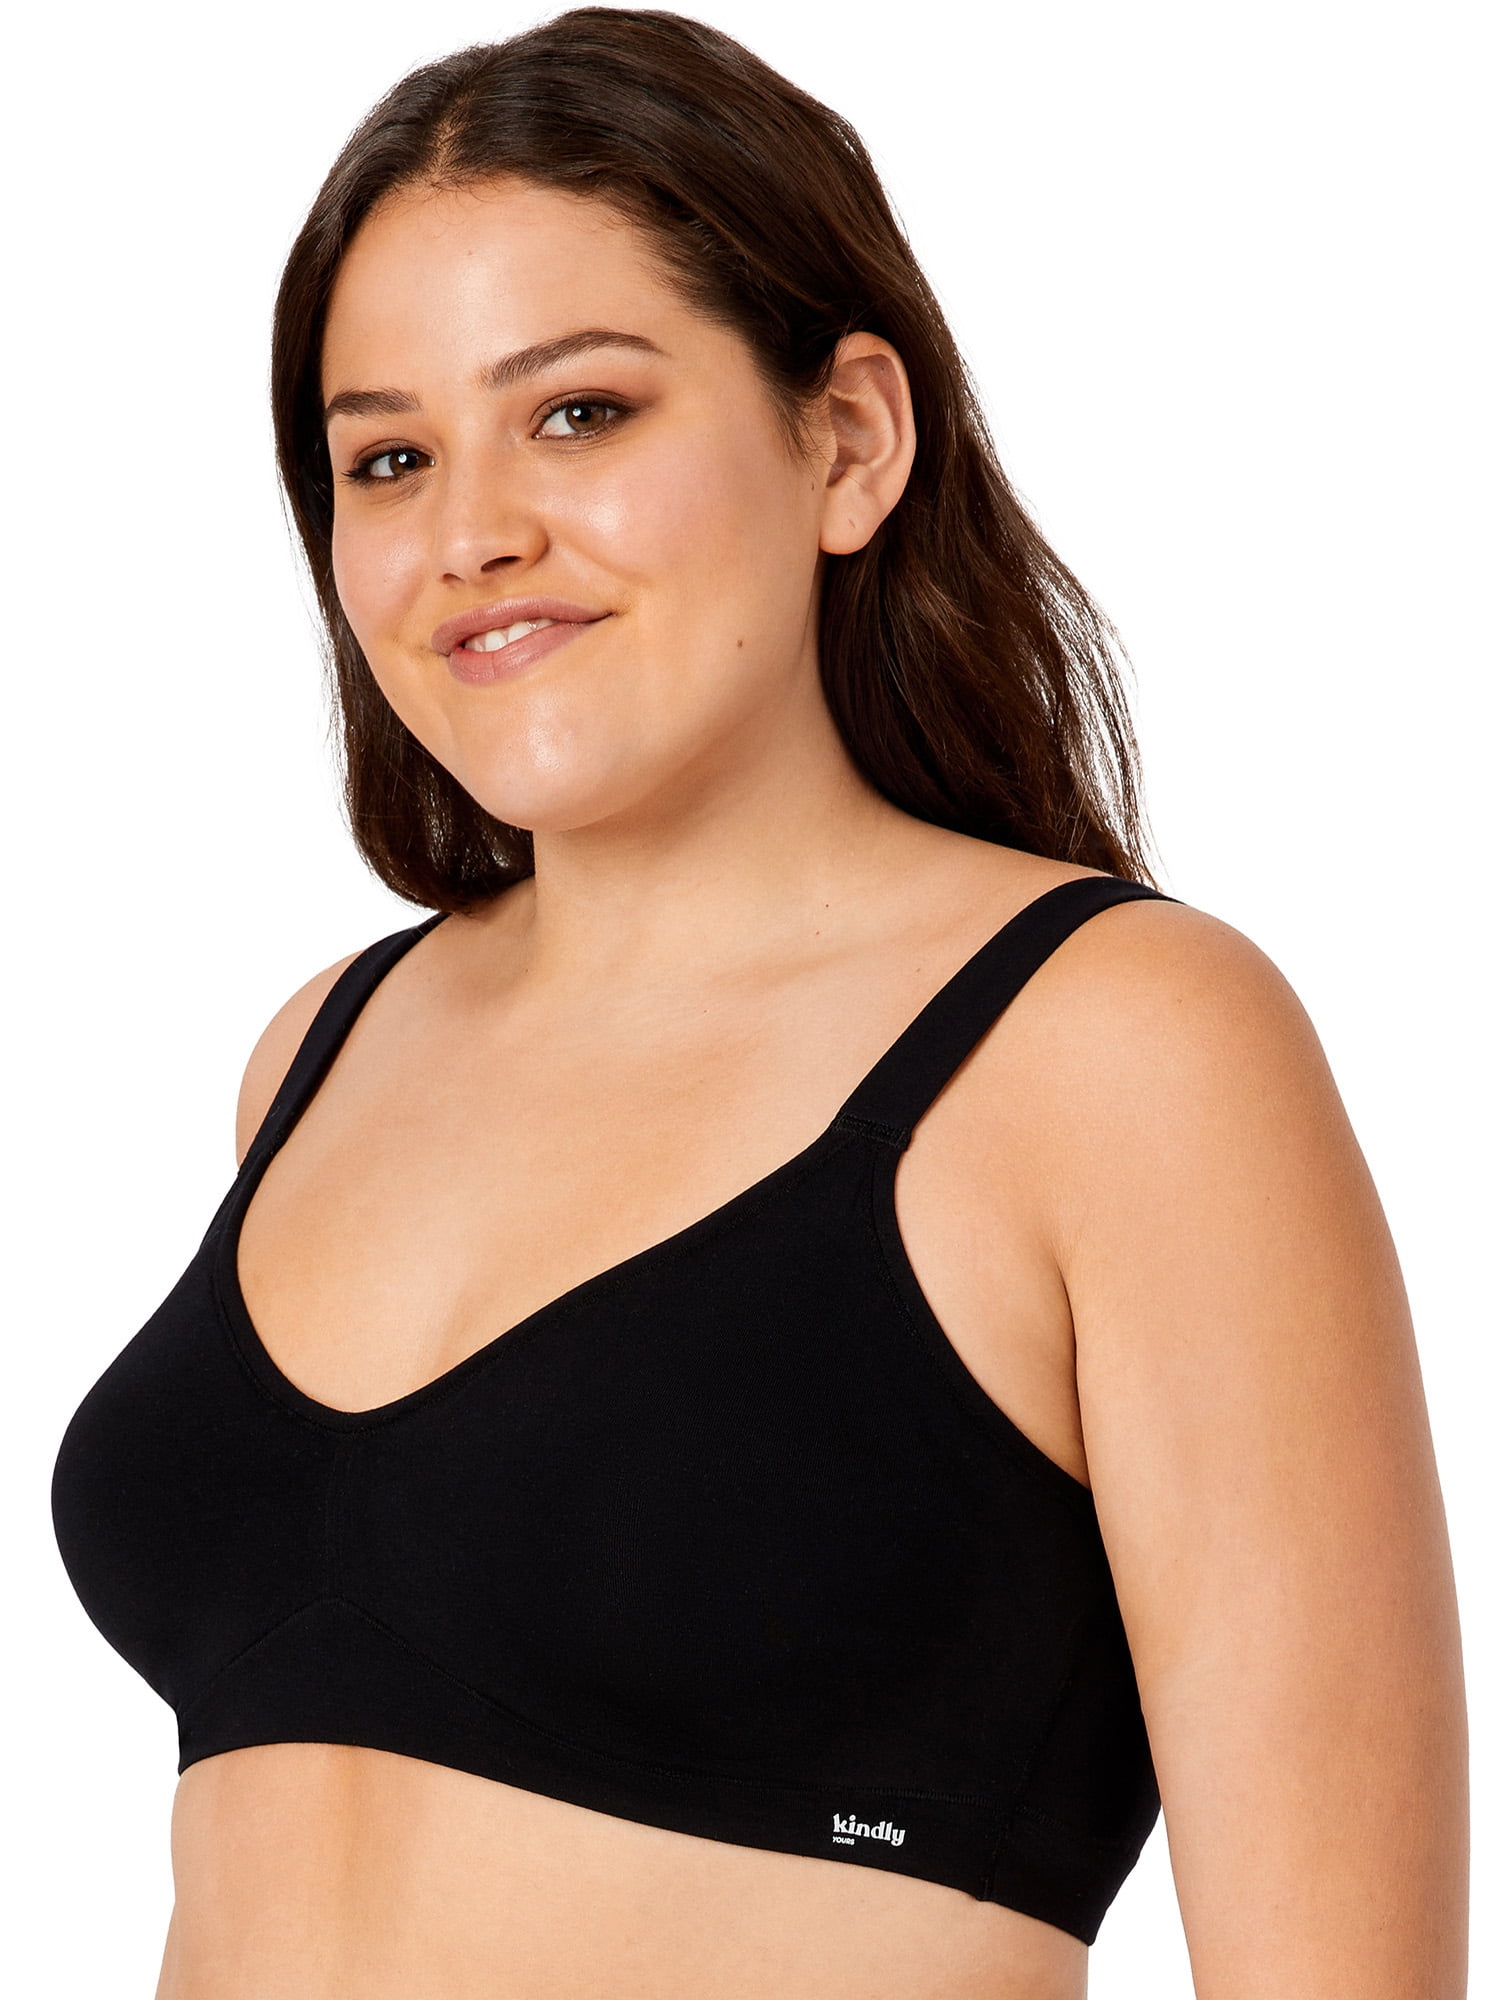 Kindly Yours Women's Comfort Modal Lounge Pullover Bra, Sizes S to XXXL